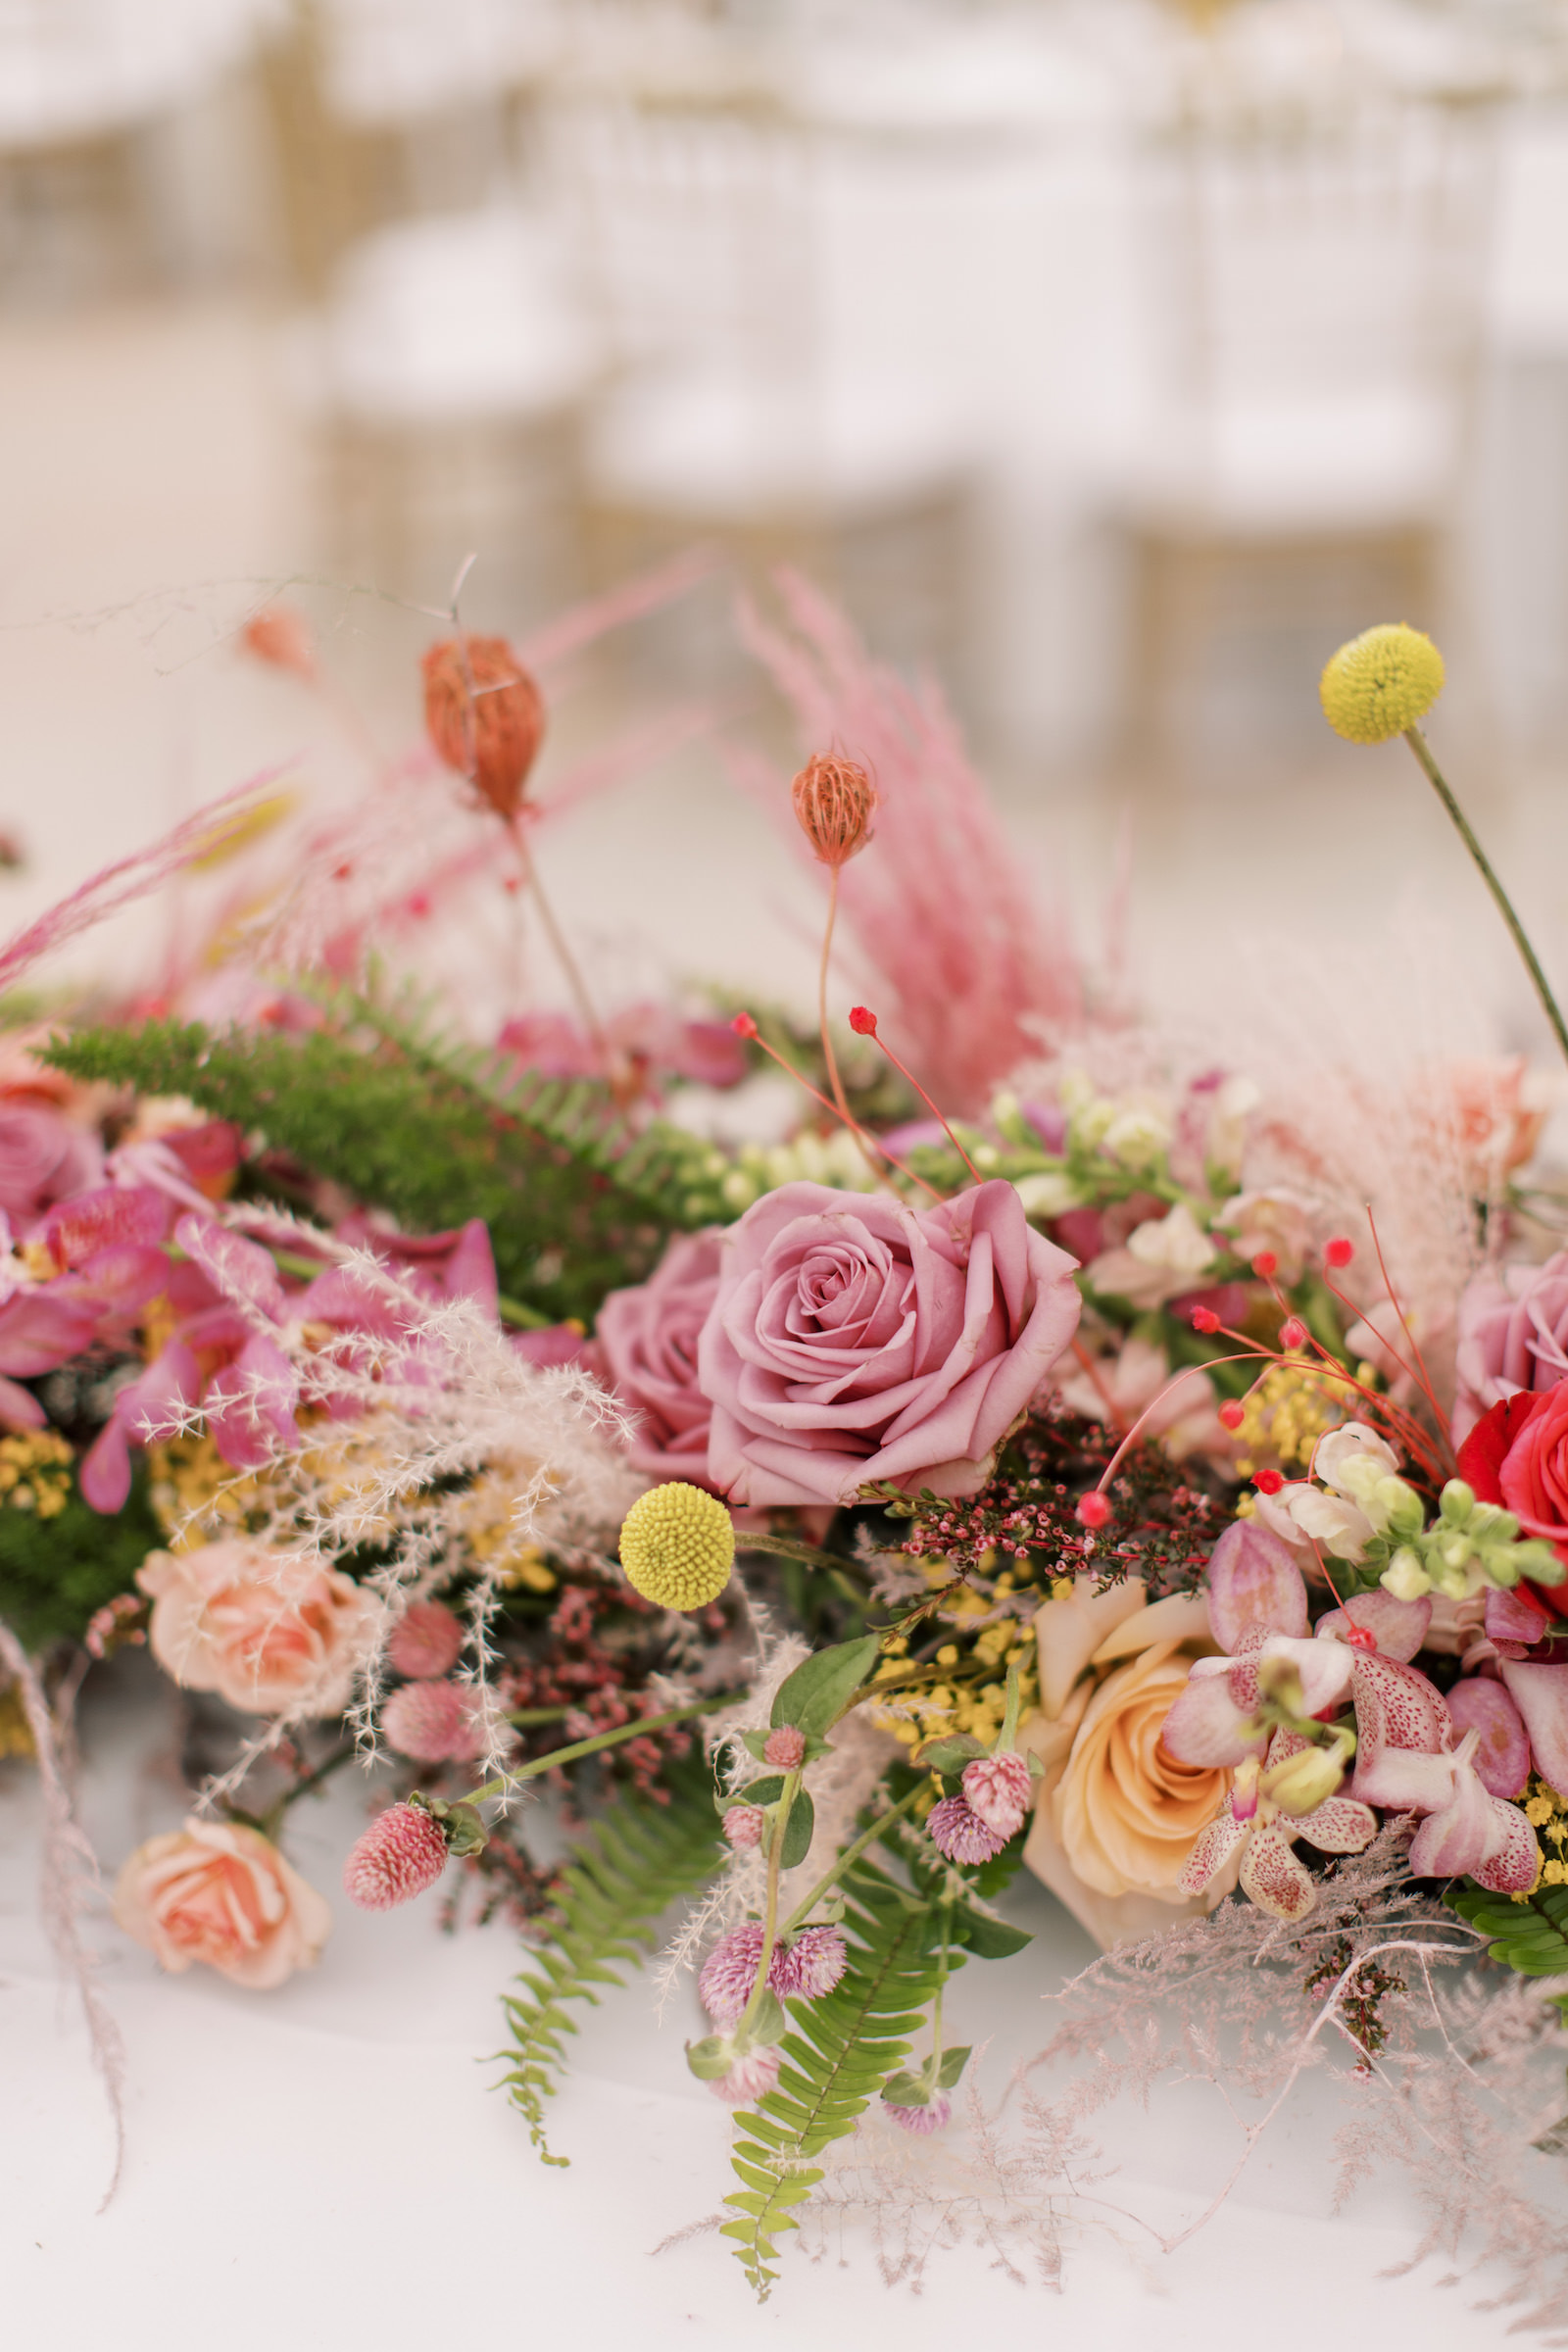 Vibrant Boho Wedding Reception Decor, Pink and Yellow Roses, Greenery Leaves, Pink Pampas Grass, Craspedia Billy Balls Floral Centerpiece